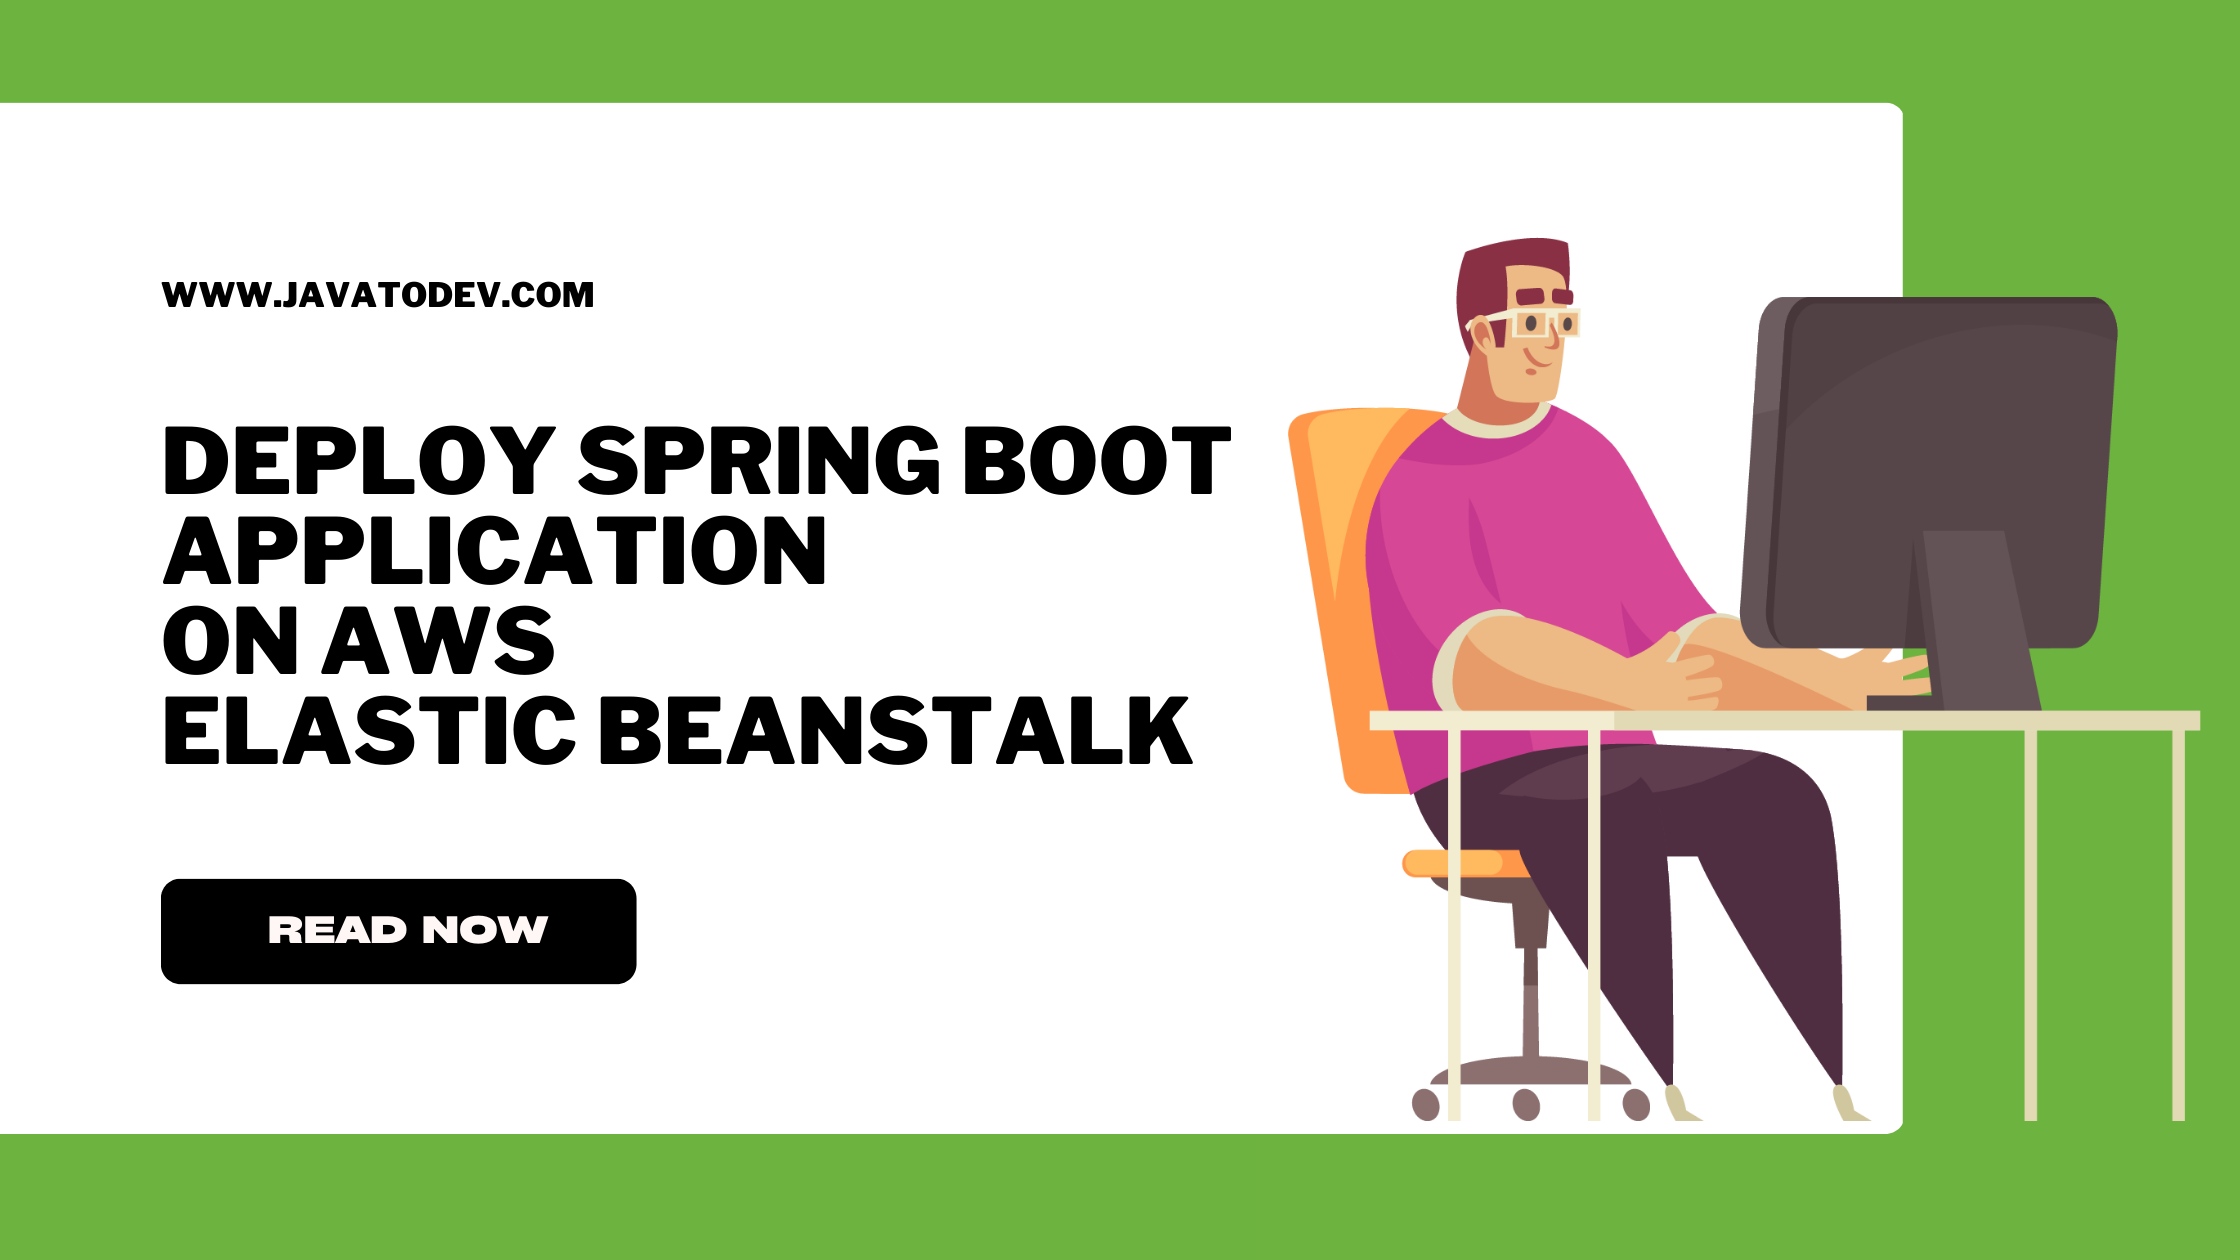 How to Deploy Spring Boot Application On AWS Elastic Beanstalk